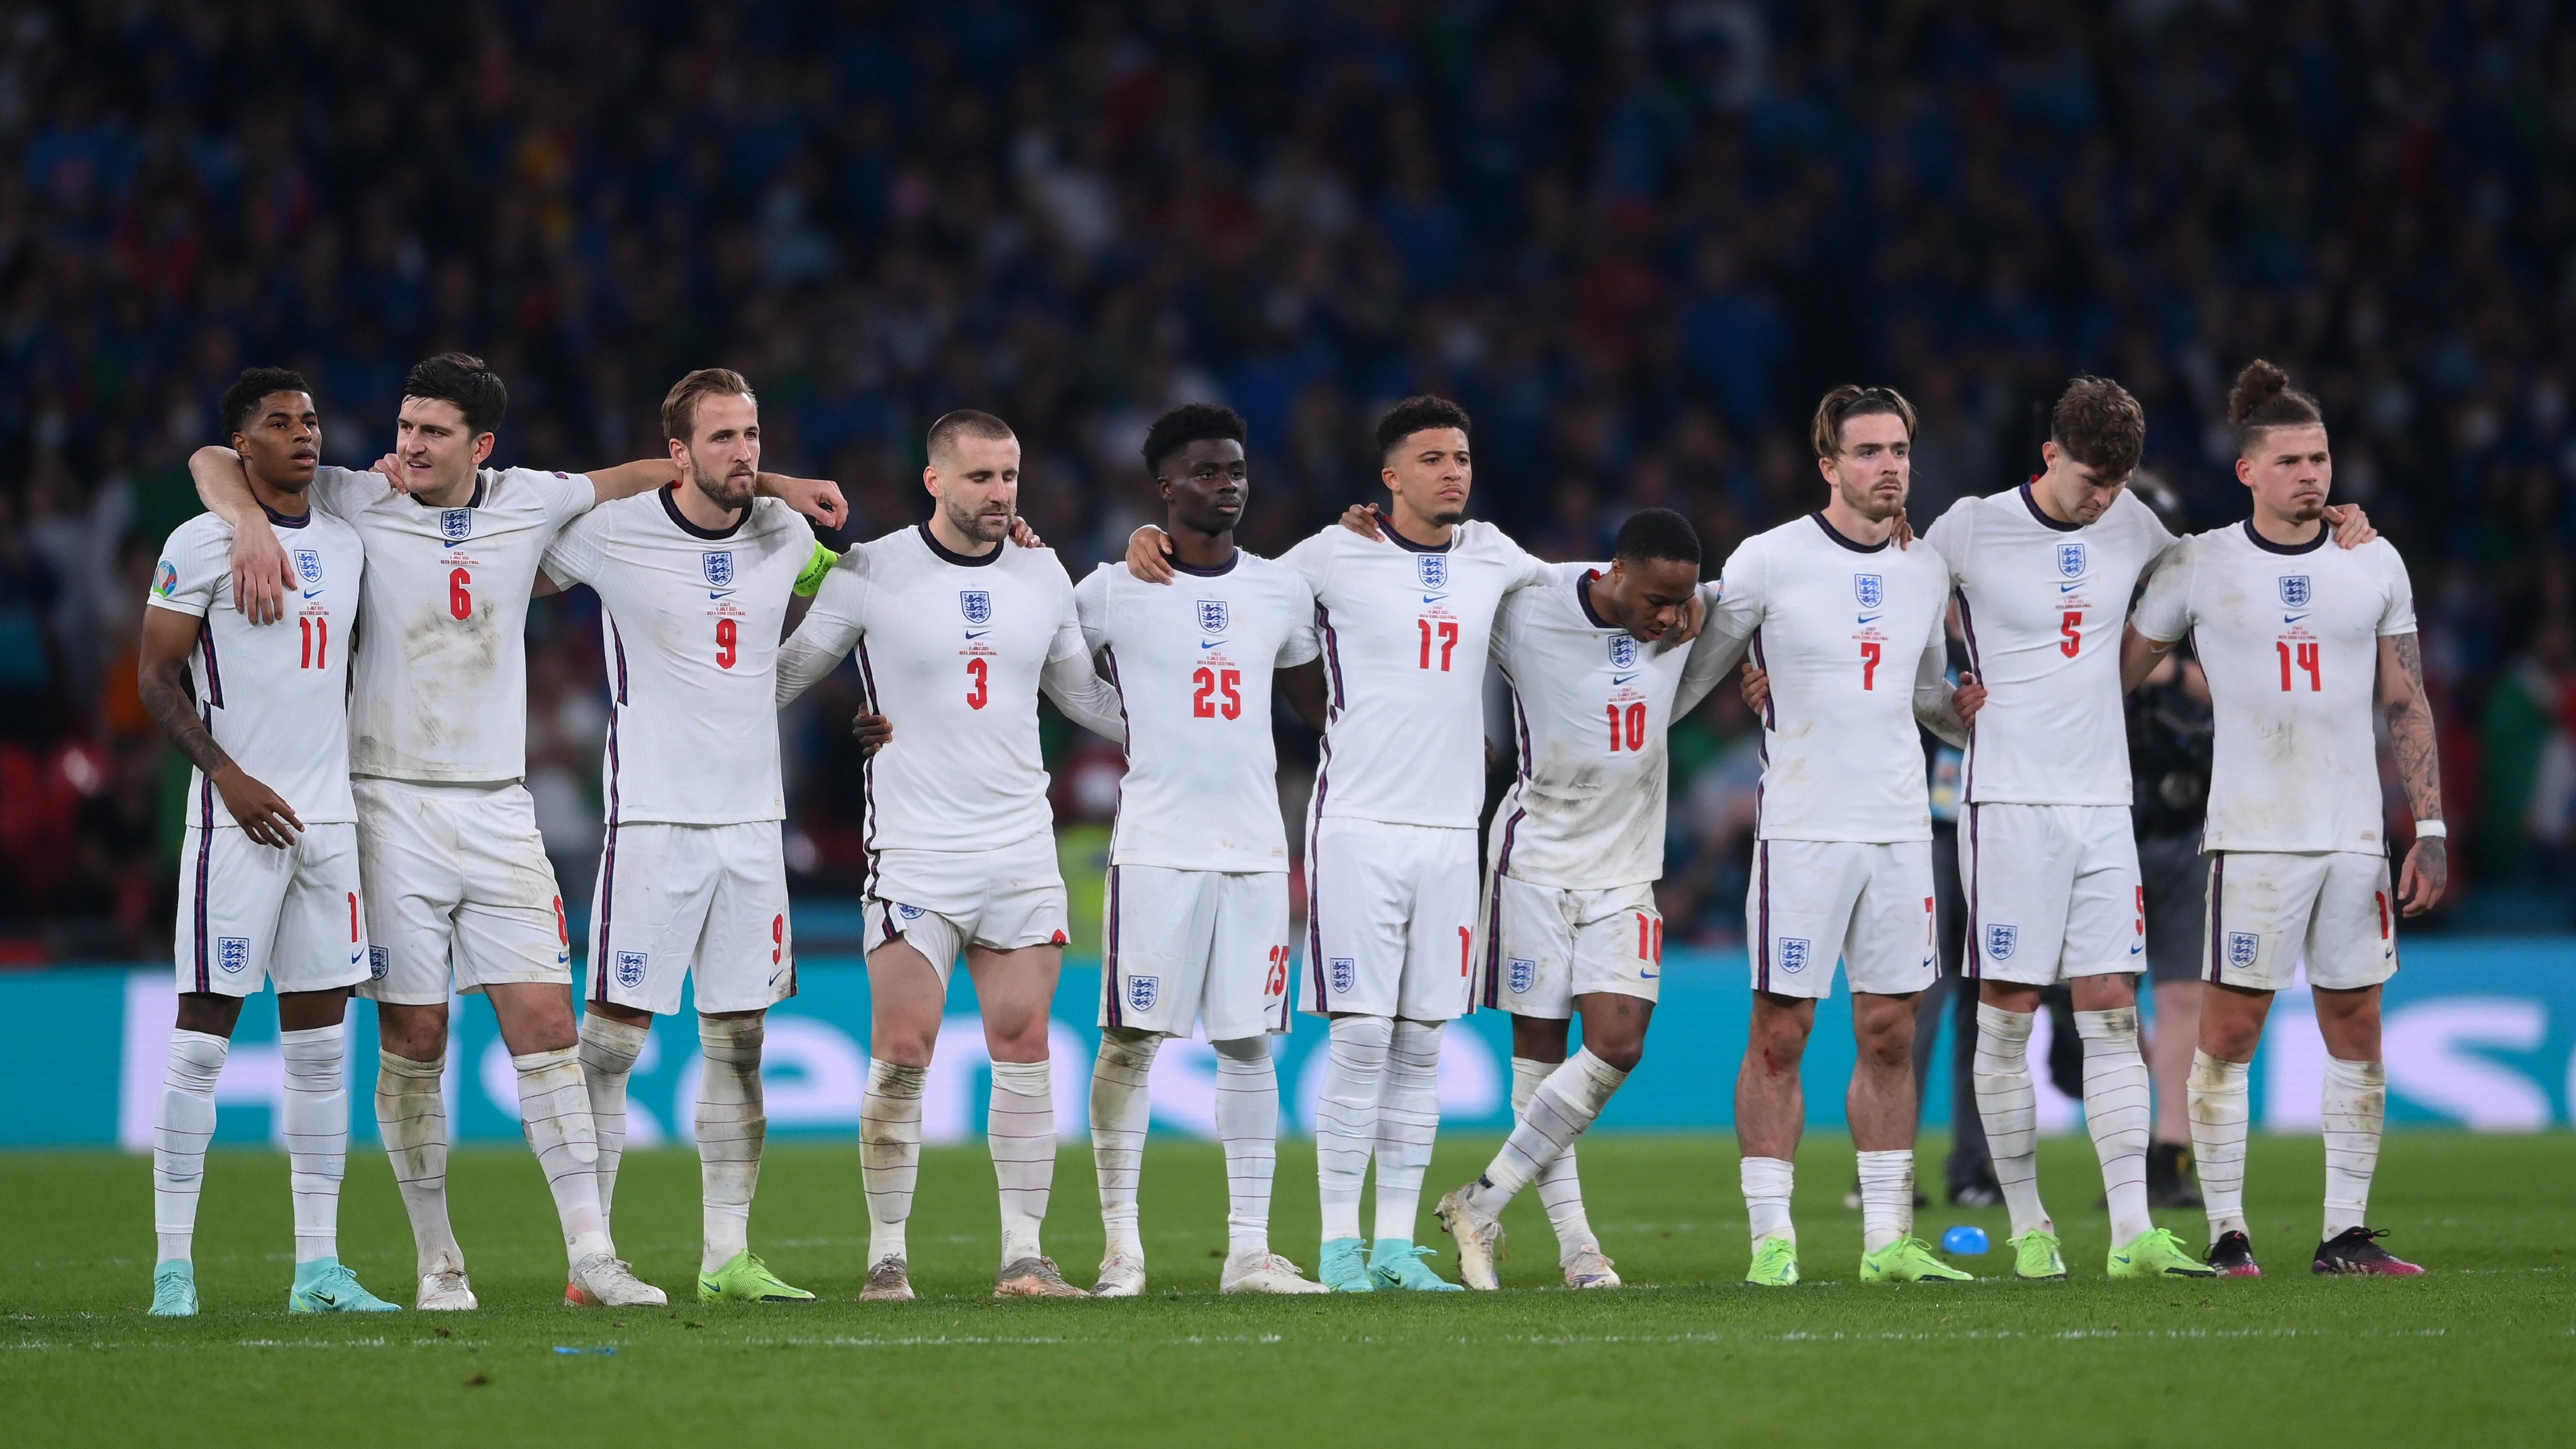 England Football Team Results In Major Tournaments